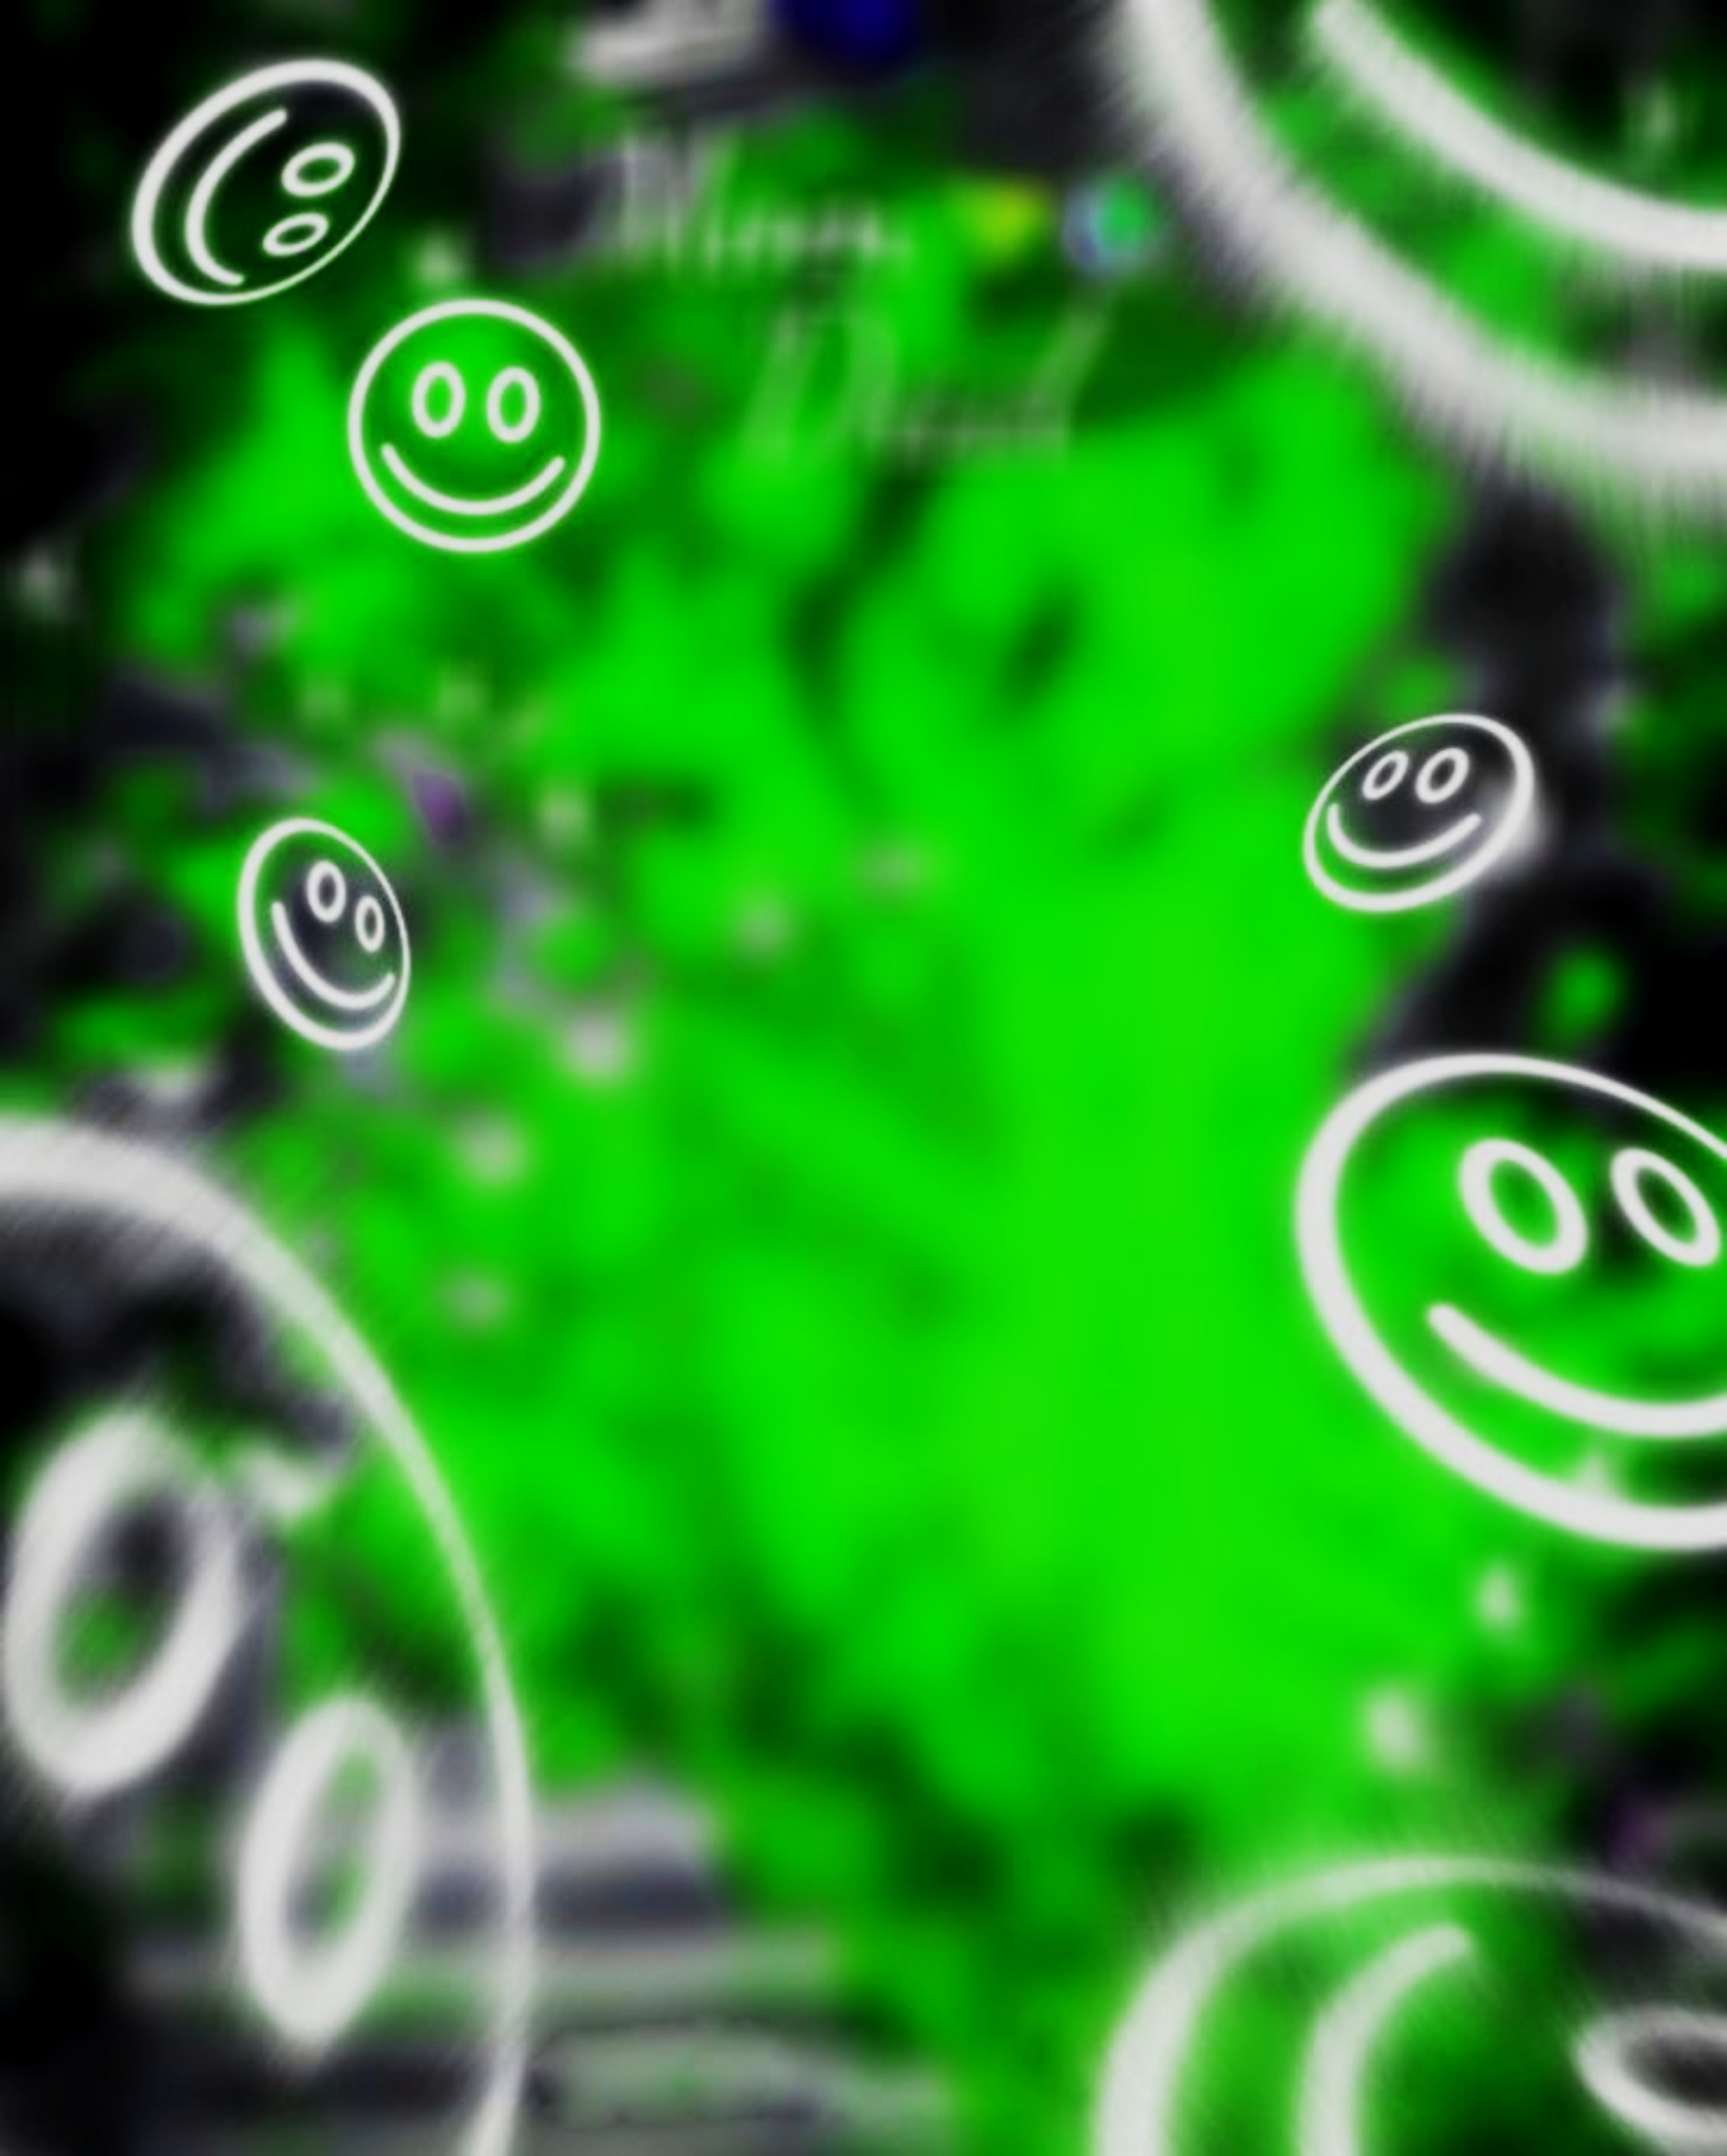 You are currently viewing Smiley face cb background hd download free